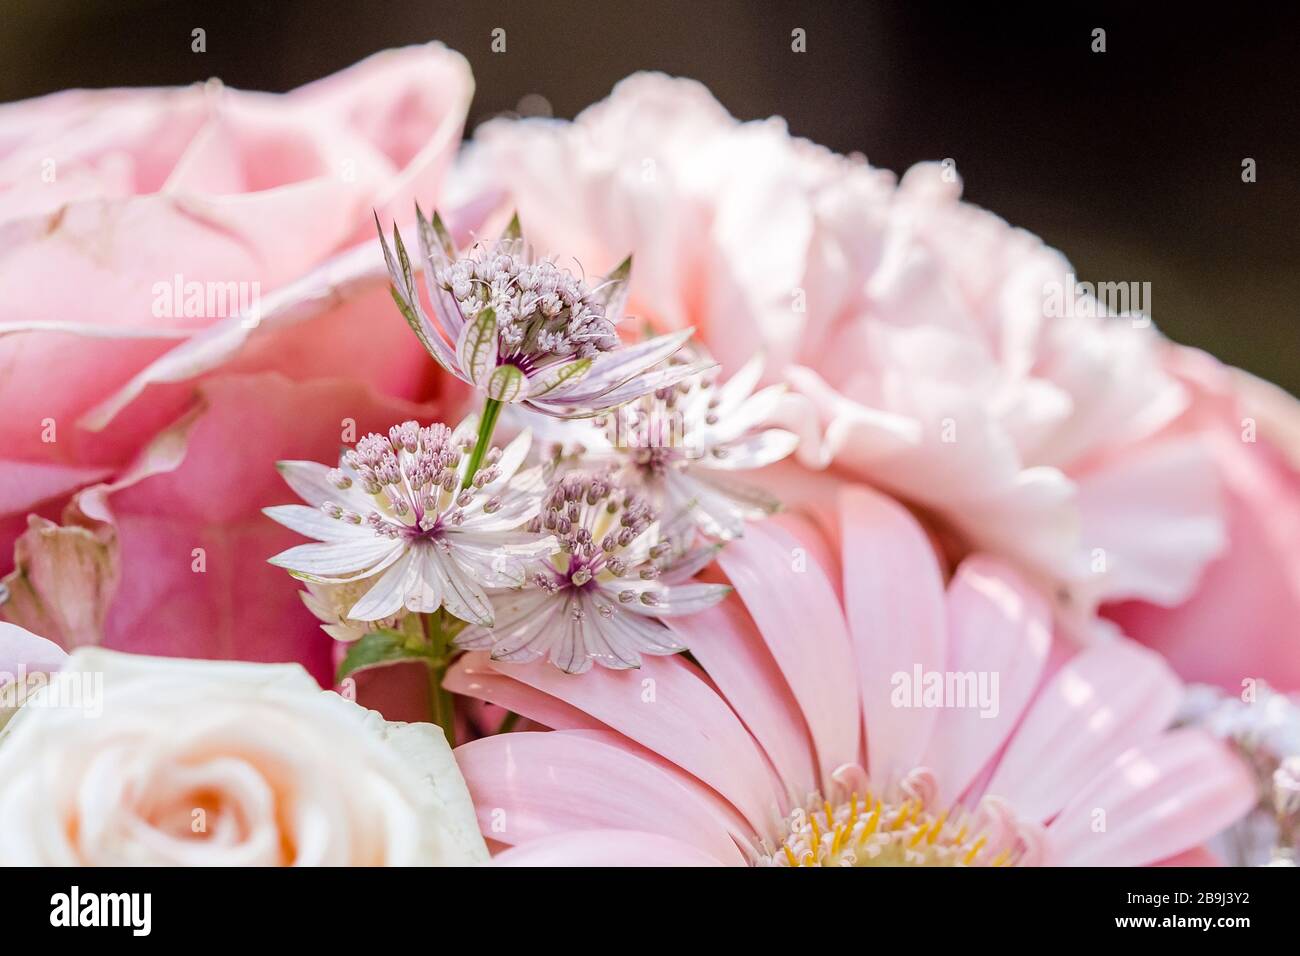 Pastel Pink And Purple Bridal Flower Bouquet Stock Photo Alamy